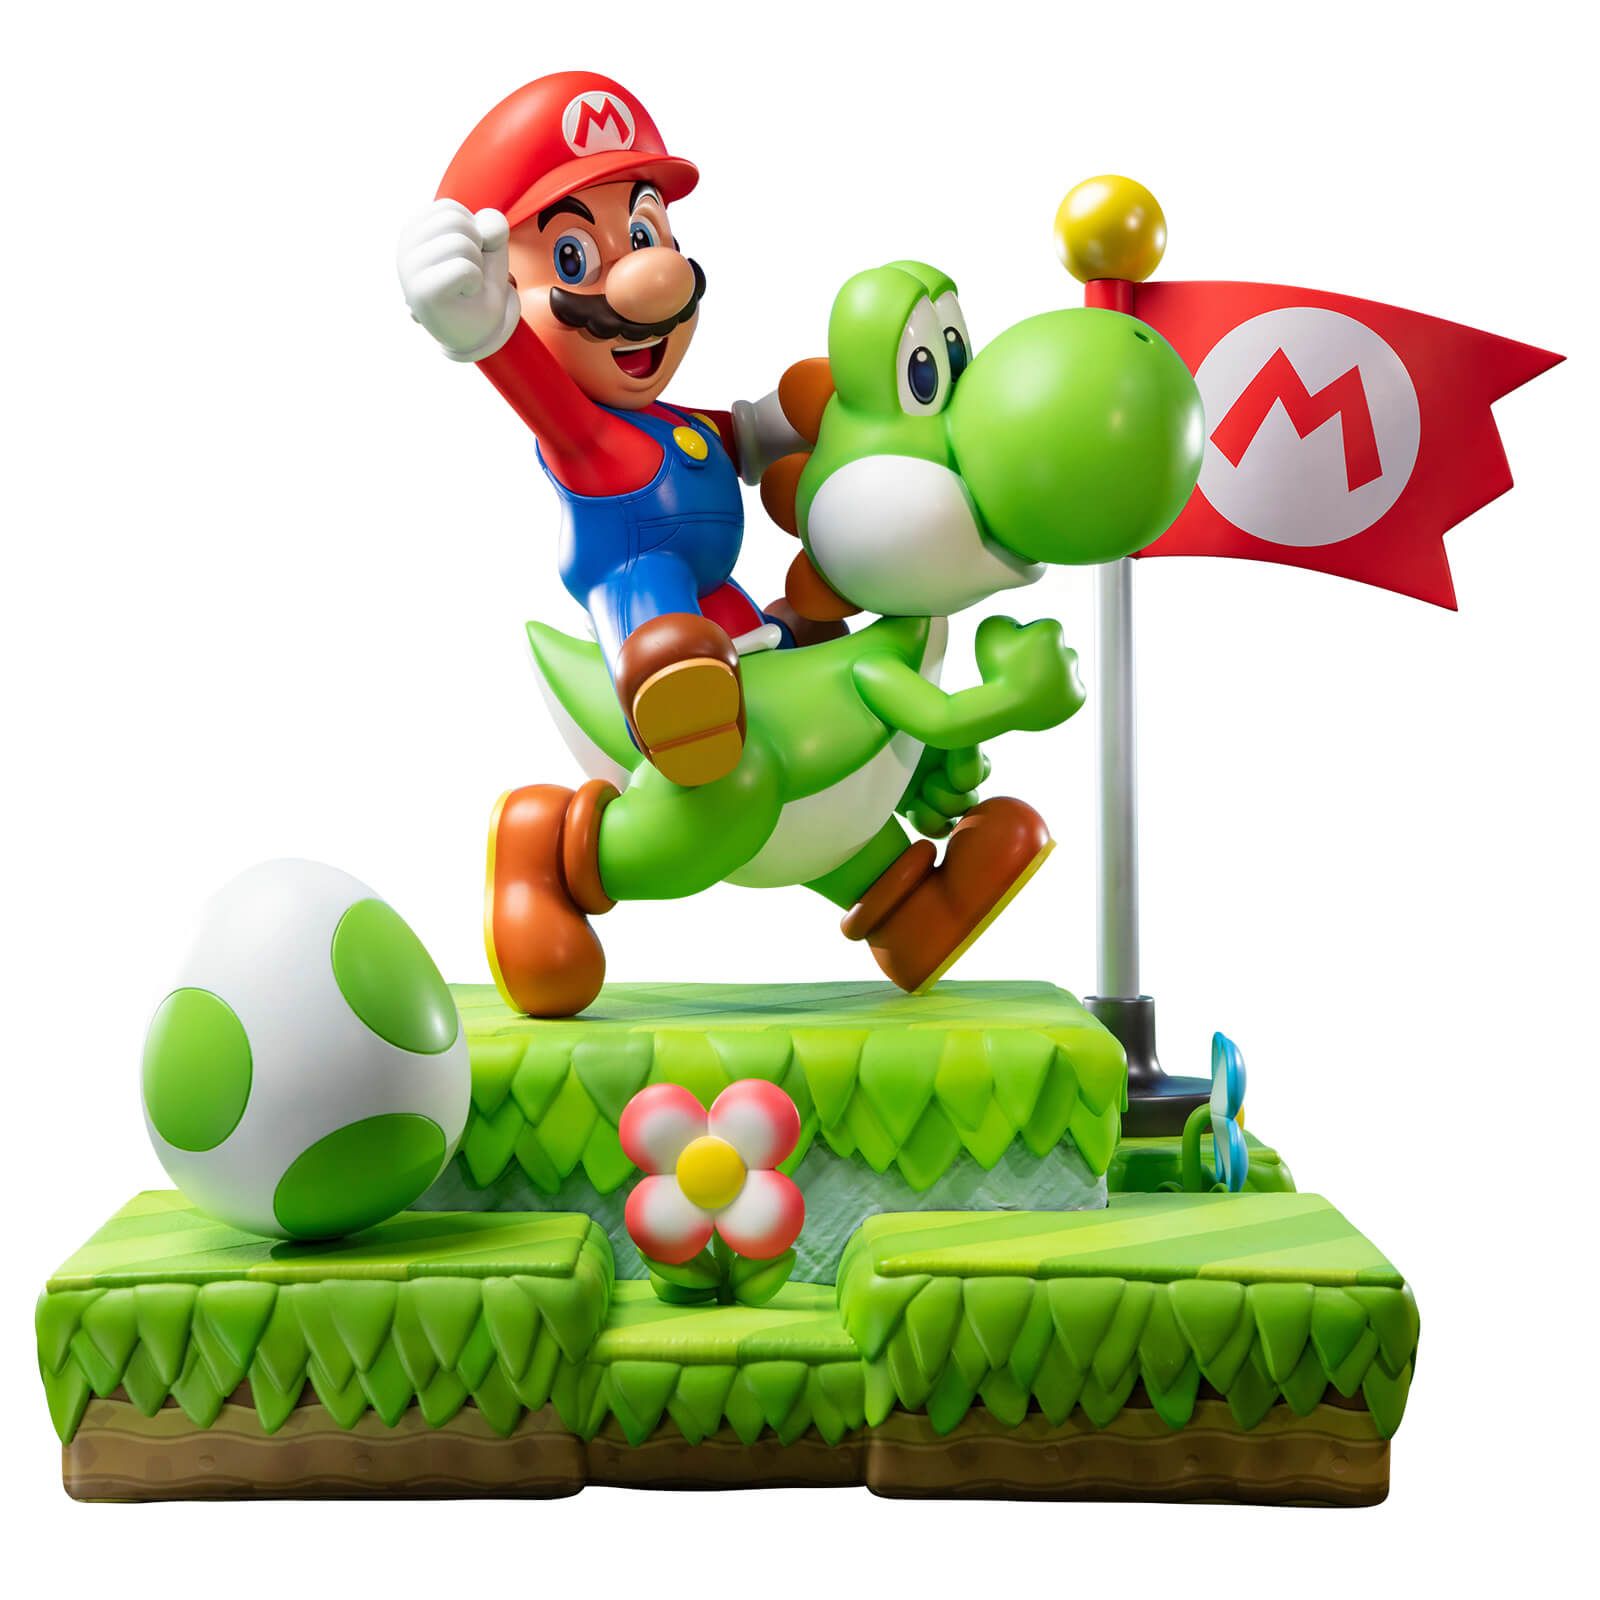 Rich People Can Celebrate Mario Day With These Expensive Figurines